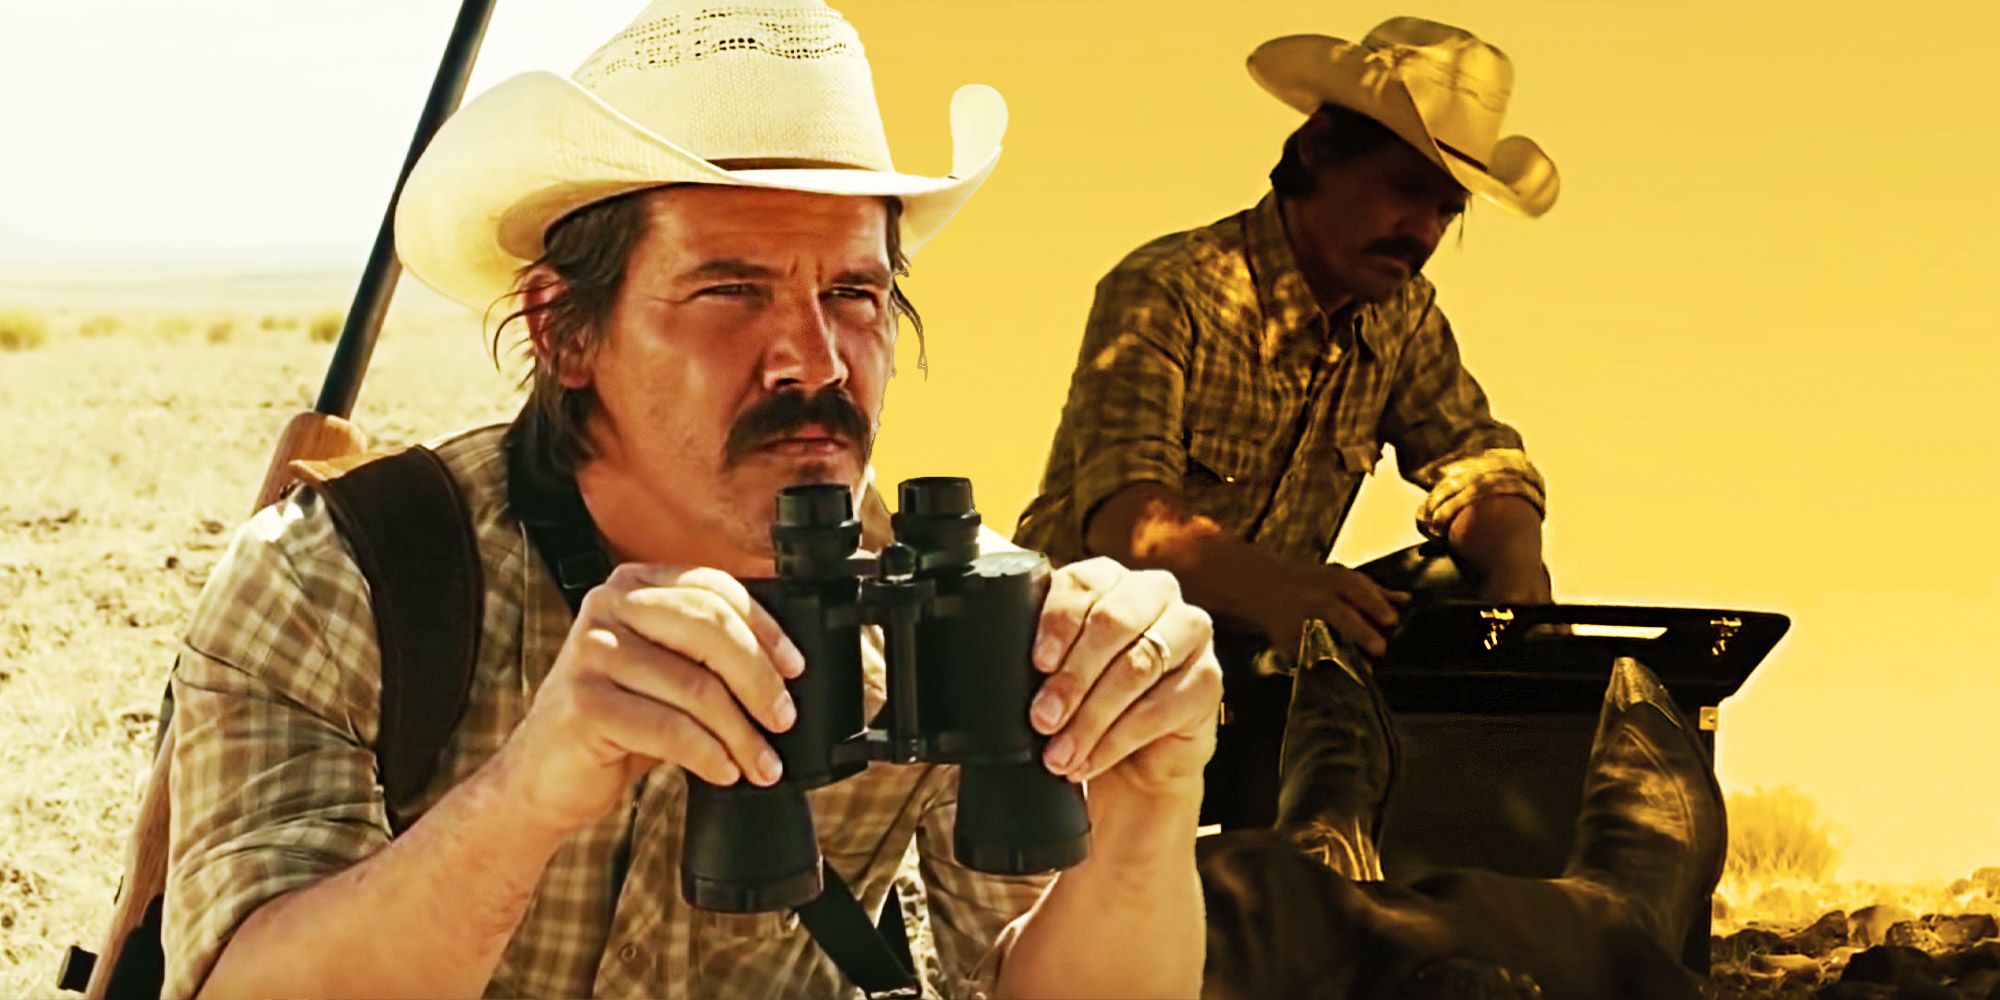 Josh Brolin thinks Coen Brothers were messing with him in No Country For Old Men